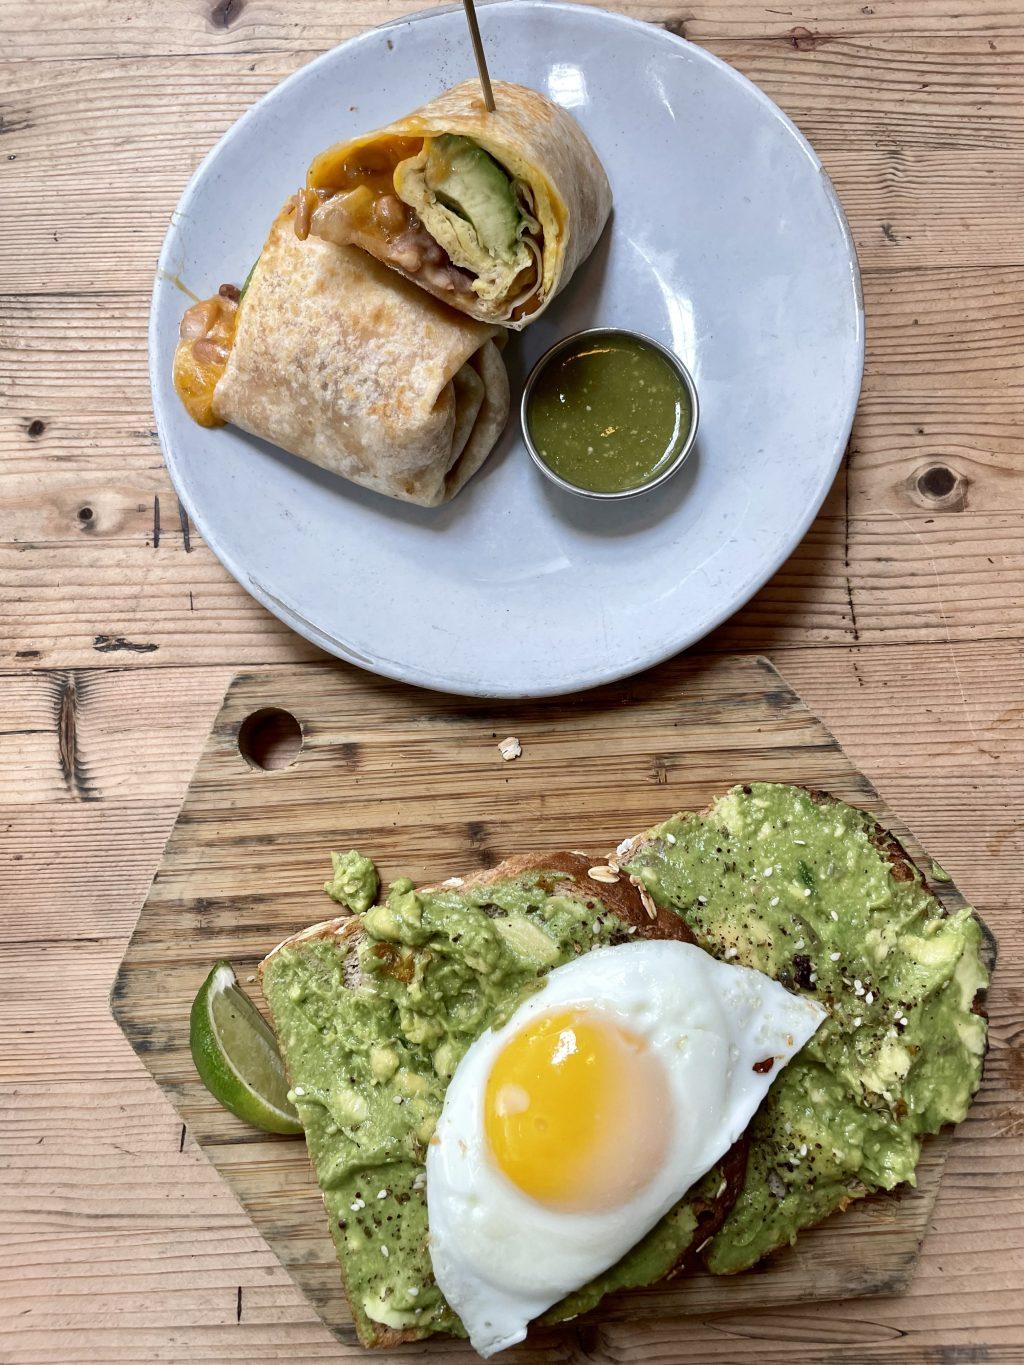 Two menu items from the Butcher's Daughter include avocado toast and their Surfer's Burrito with filling made from farm eggs, avocado, cheddar, pinto beans and hash browns. The café offered a selection of breakfast items that were available throughout the entire day.